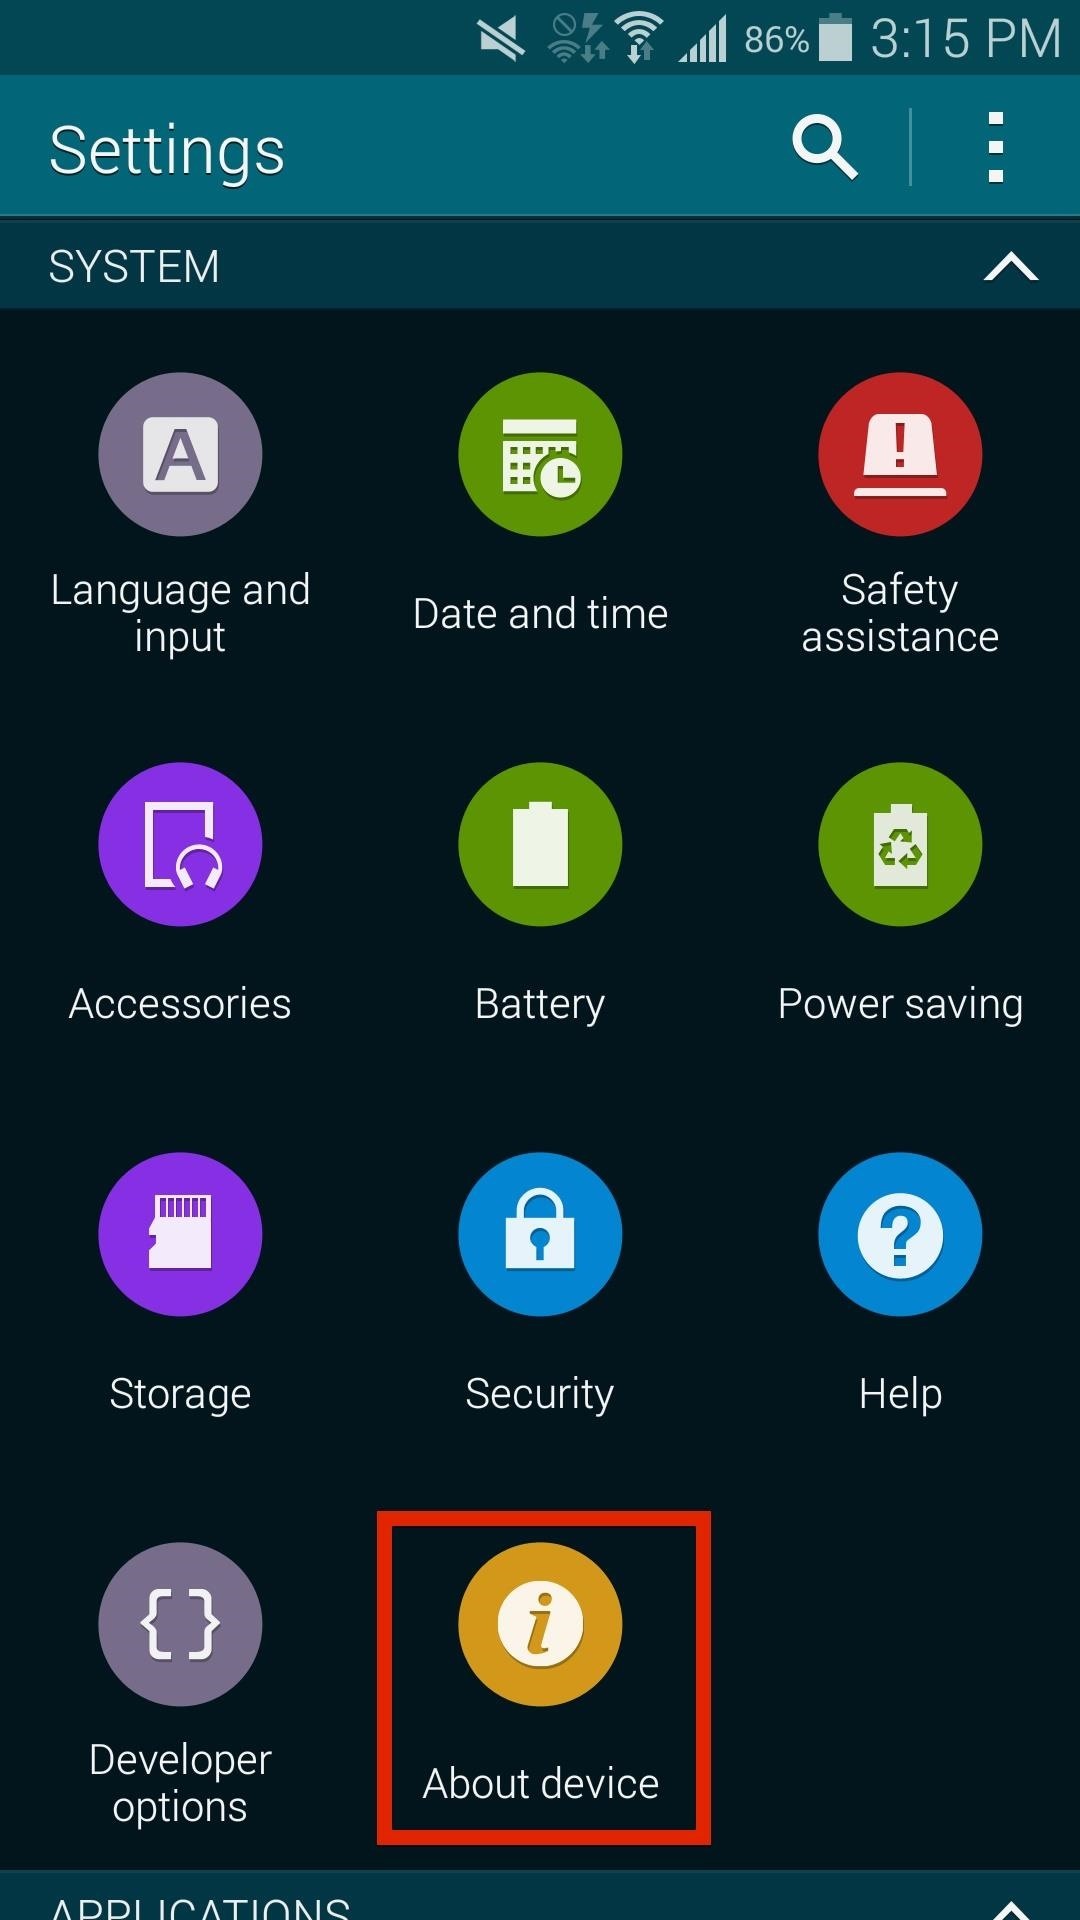 How to Enable Developer Options & USB Debugging on Your Samsung Galaxy S5